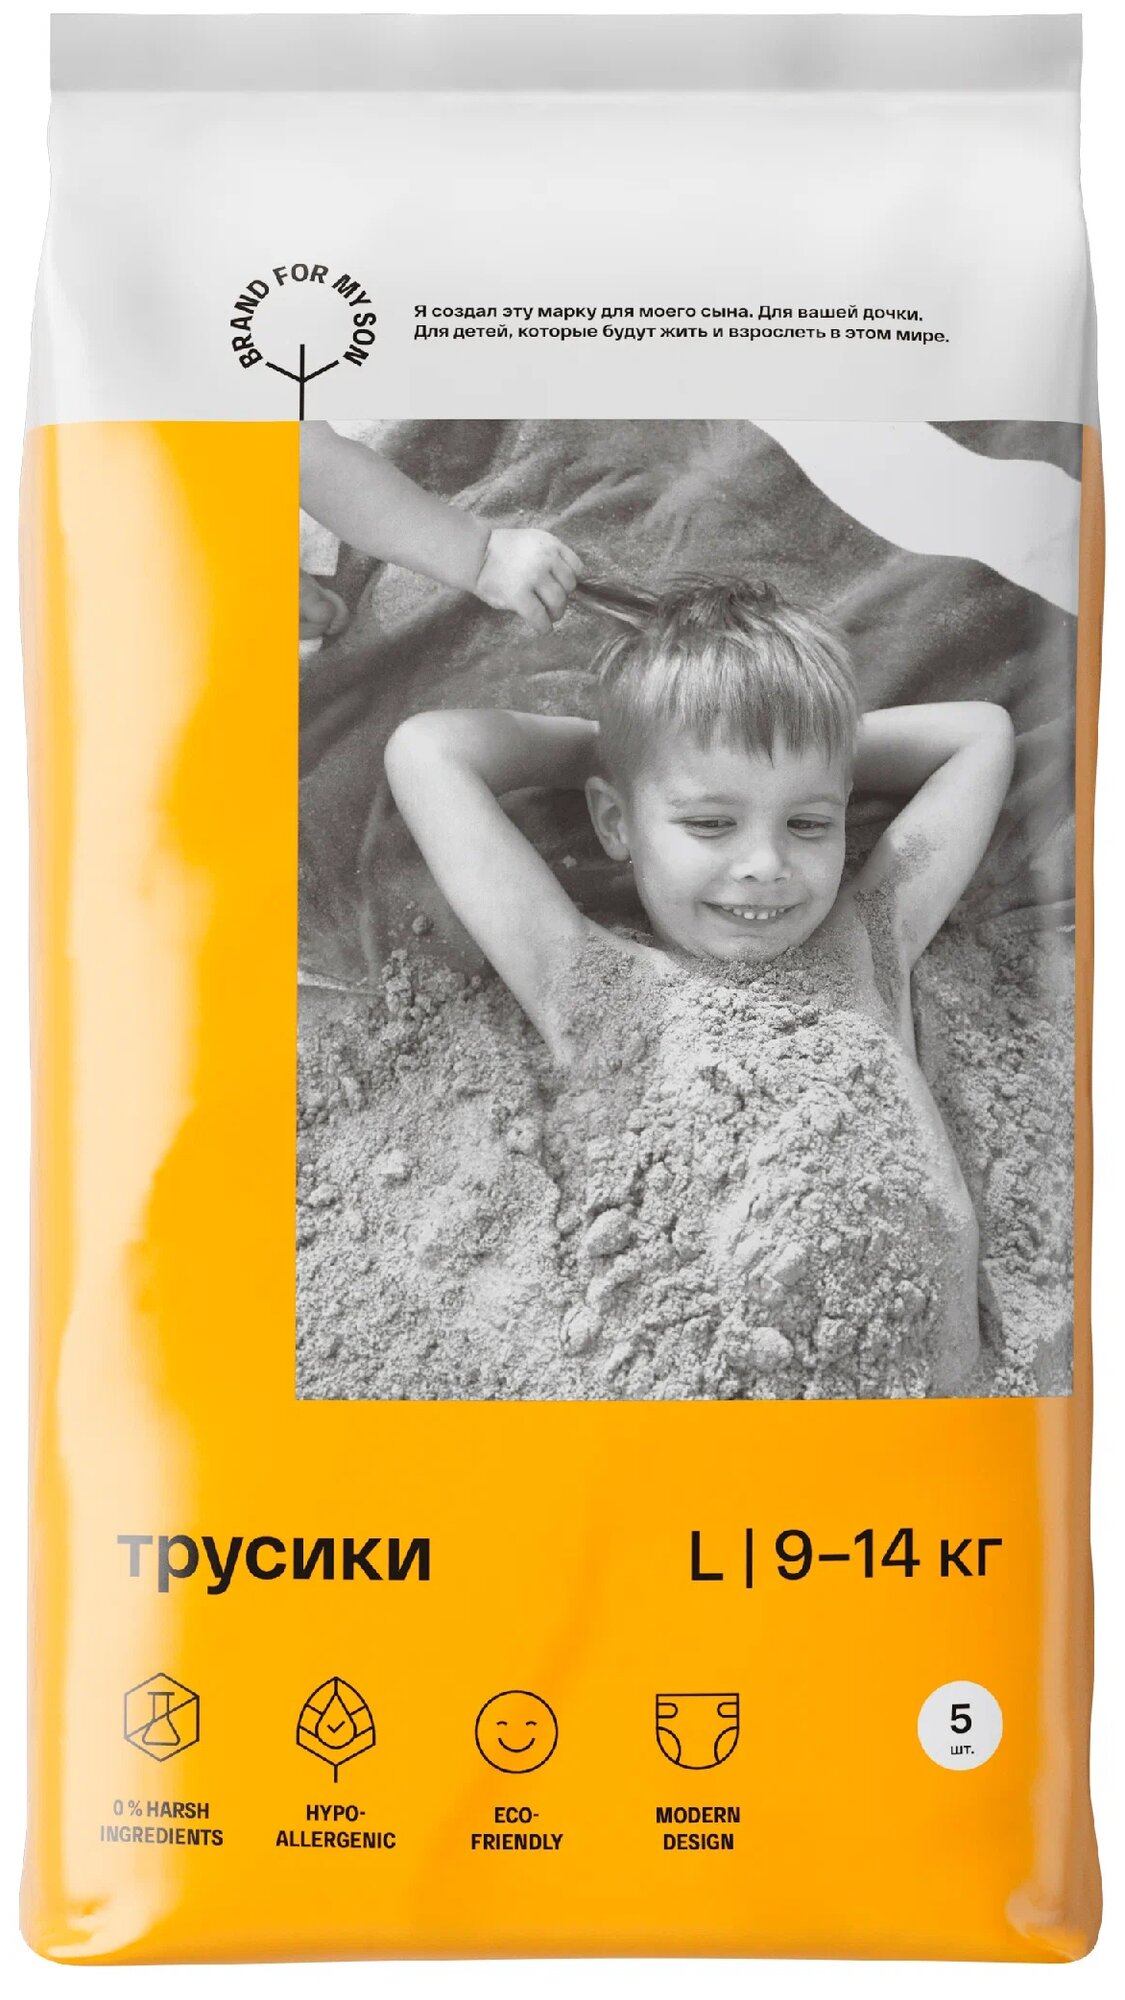 Brand For My Son трусики, Travel pack L 9-14 кг. 5 шт, мод. FD016